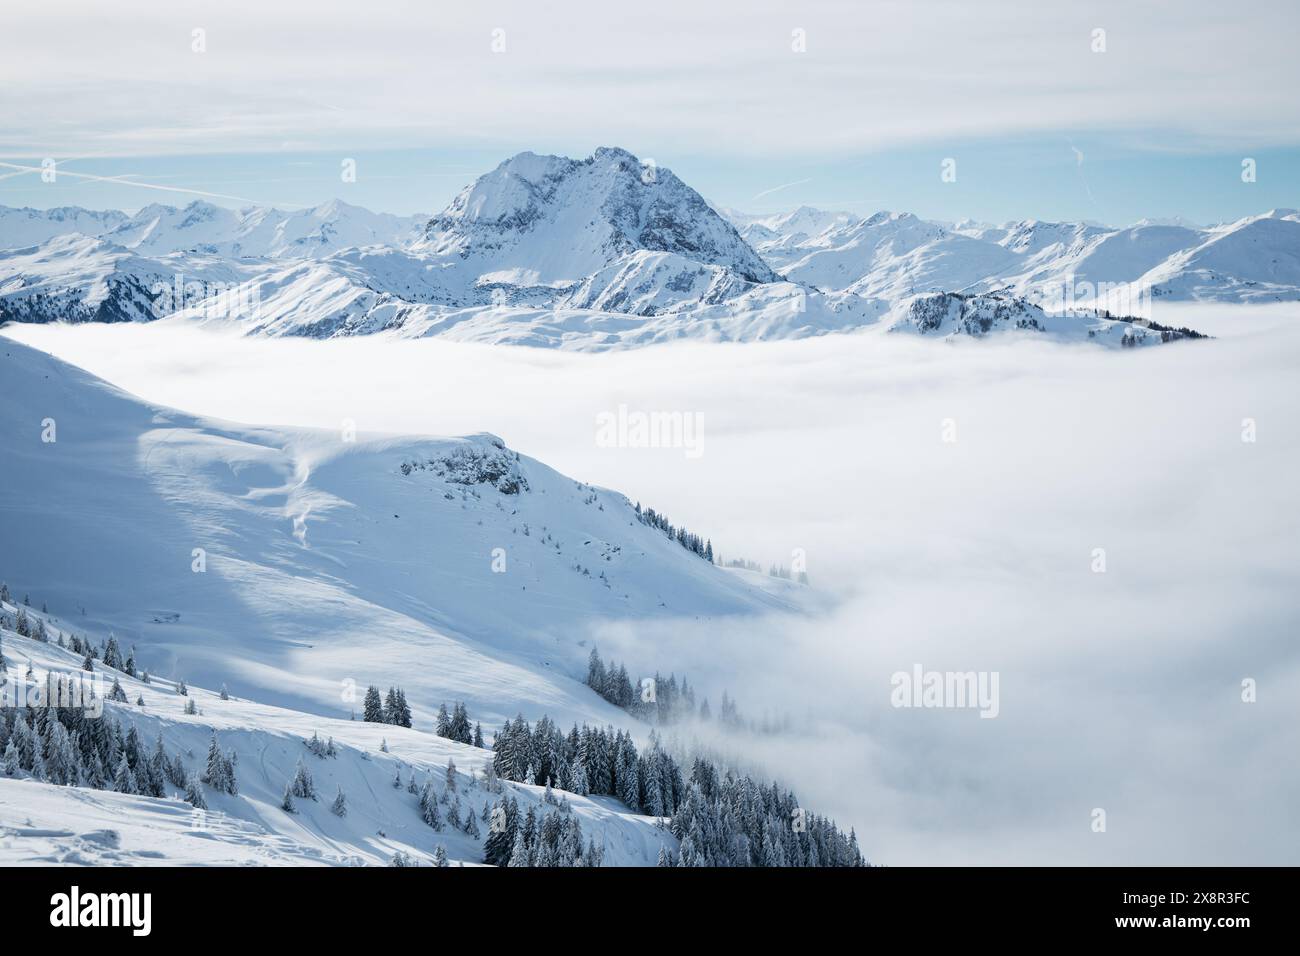 Snow-covered mountains under a clear sky with misty valleys Stock Photo